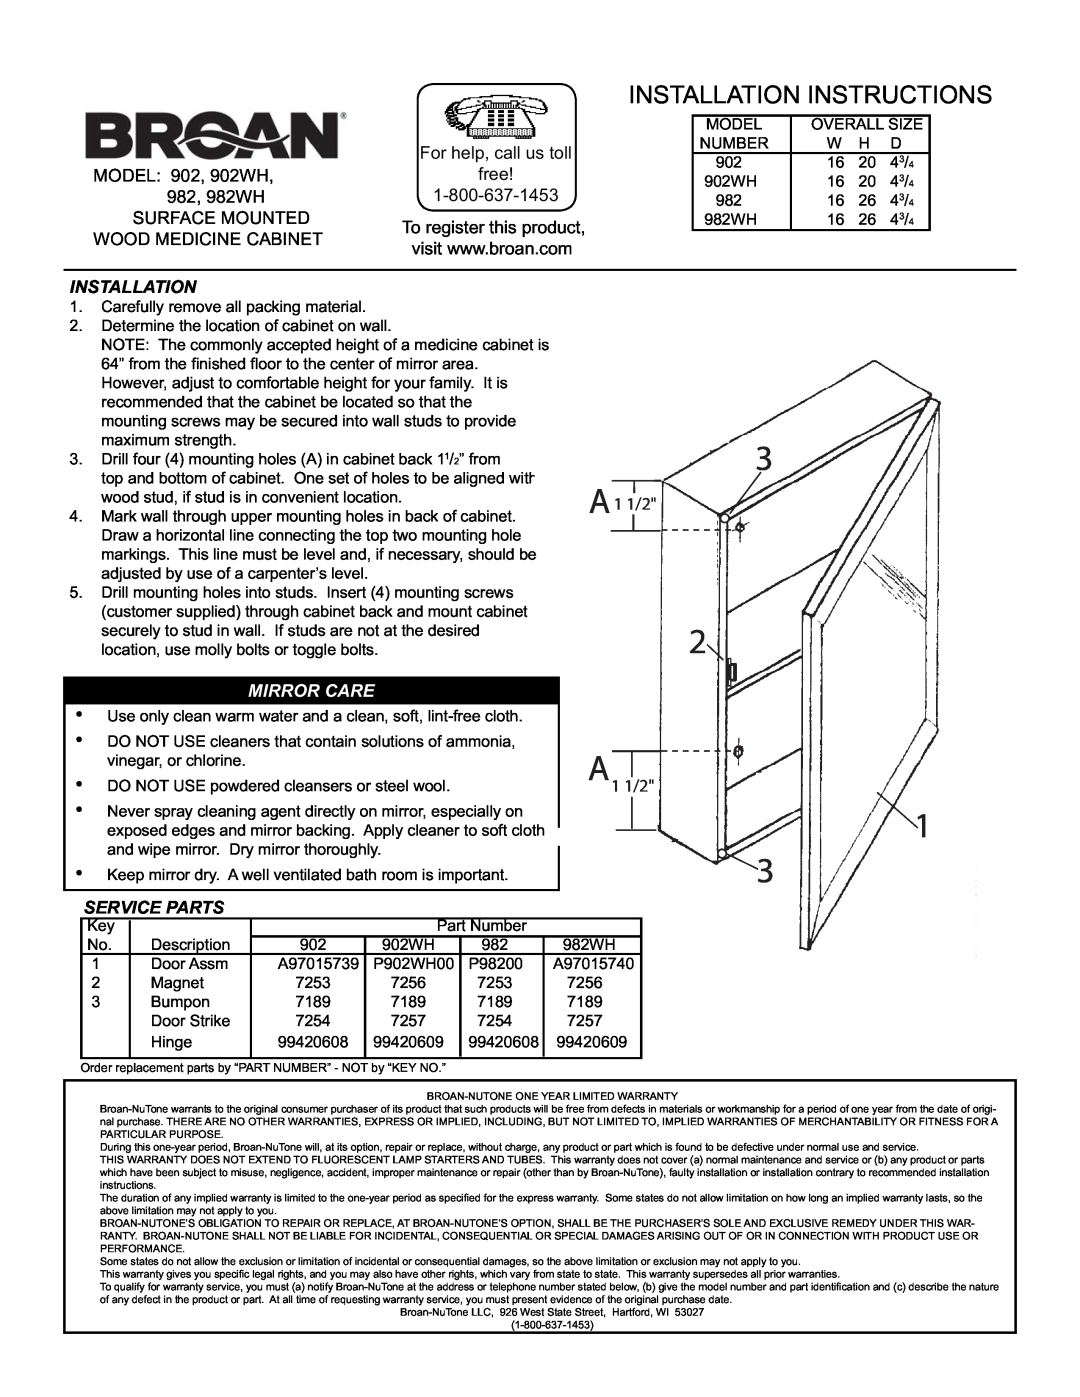 Broan installation instructions For help, call us toll, MODEL 902, 902WH, free, 982, 982WH, 1-800-637-1453, Mirror Care 